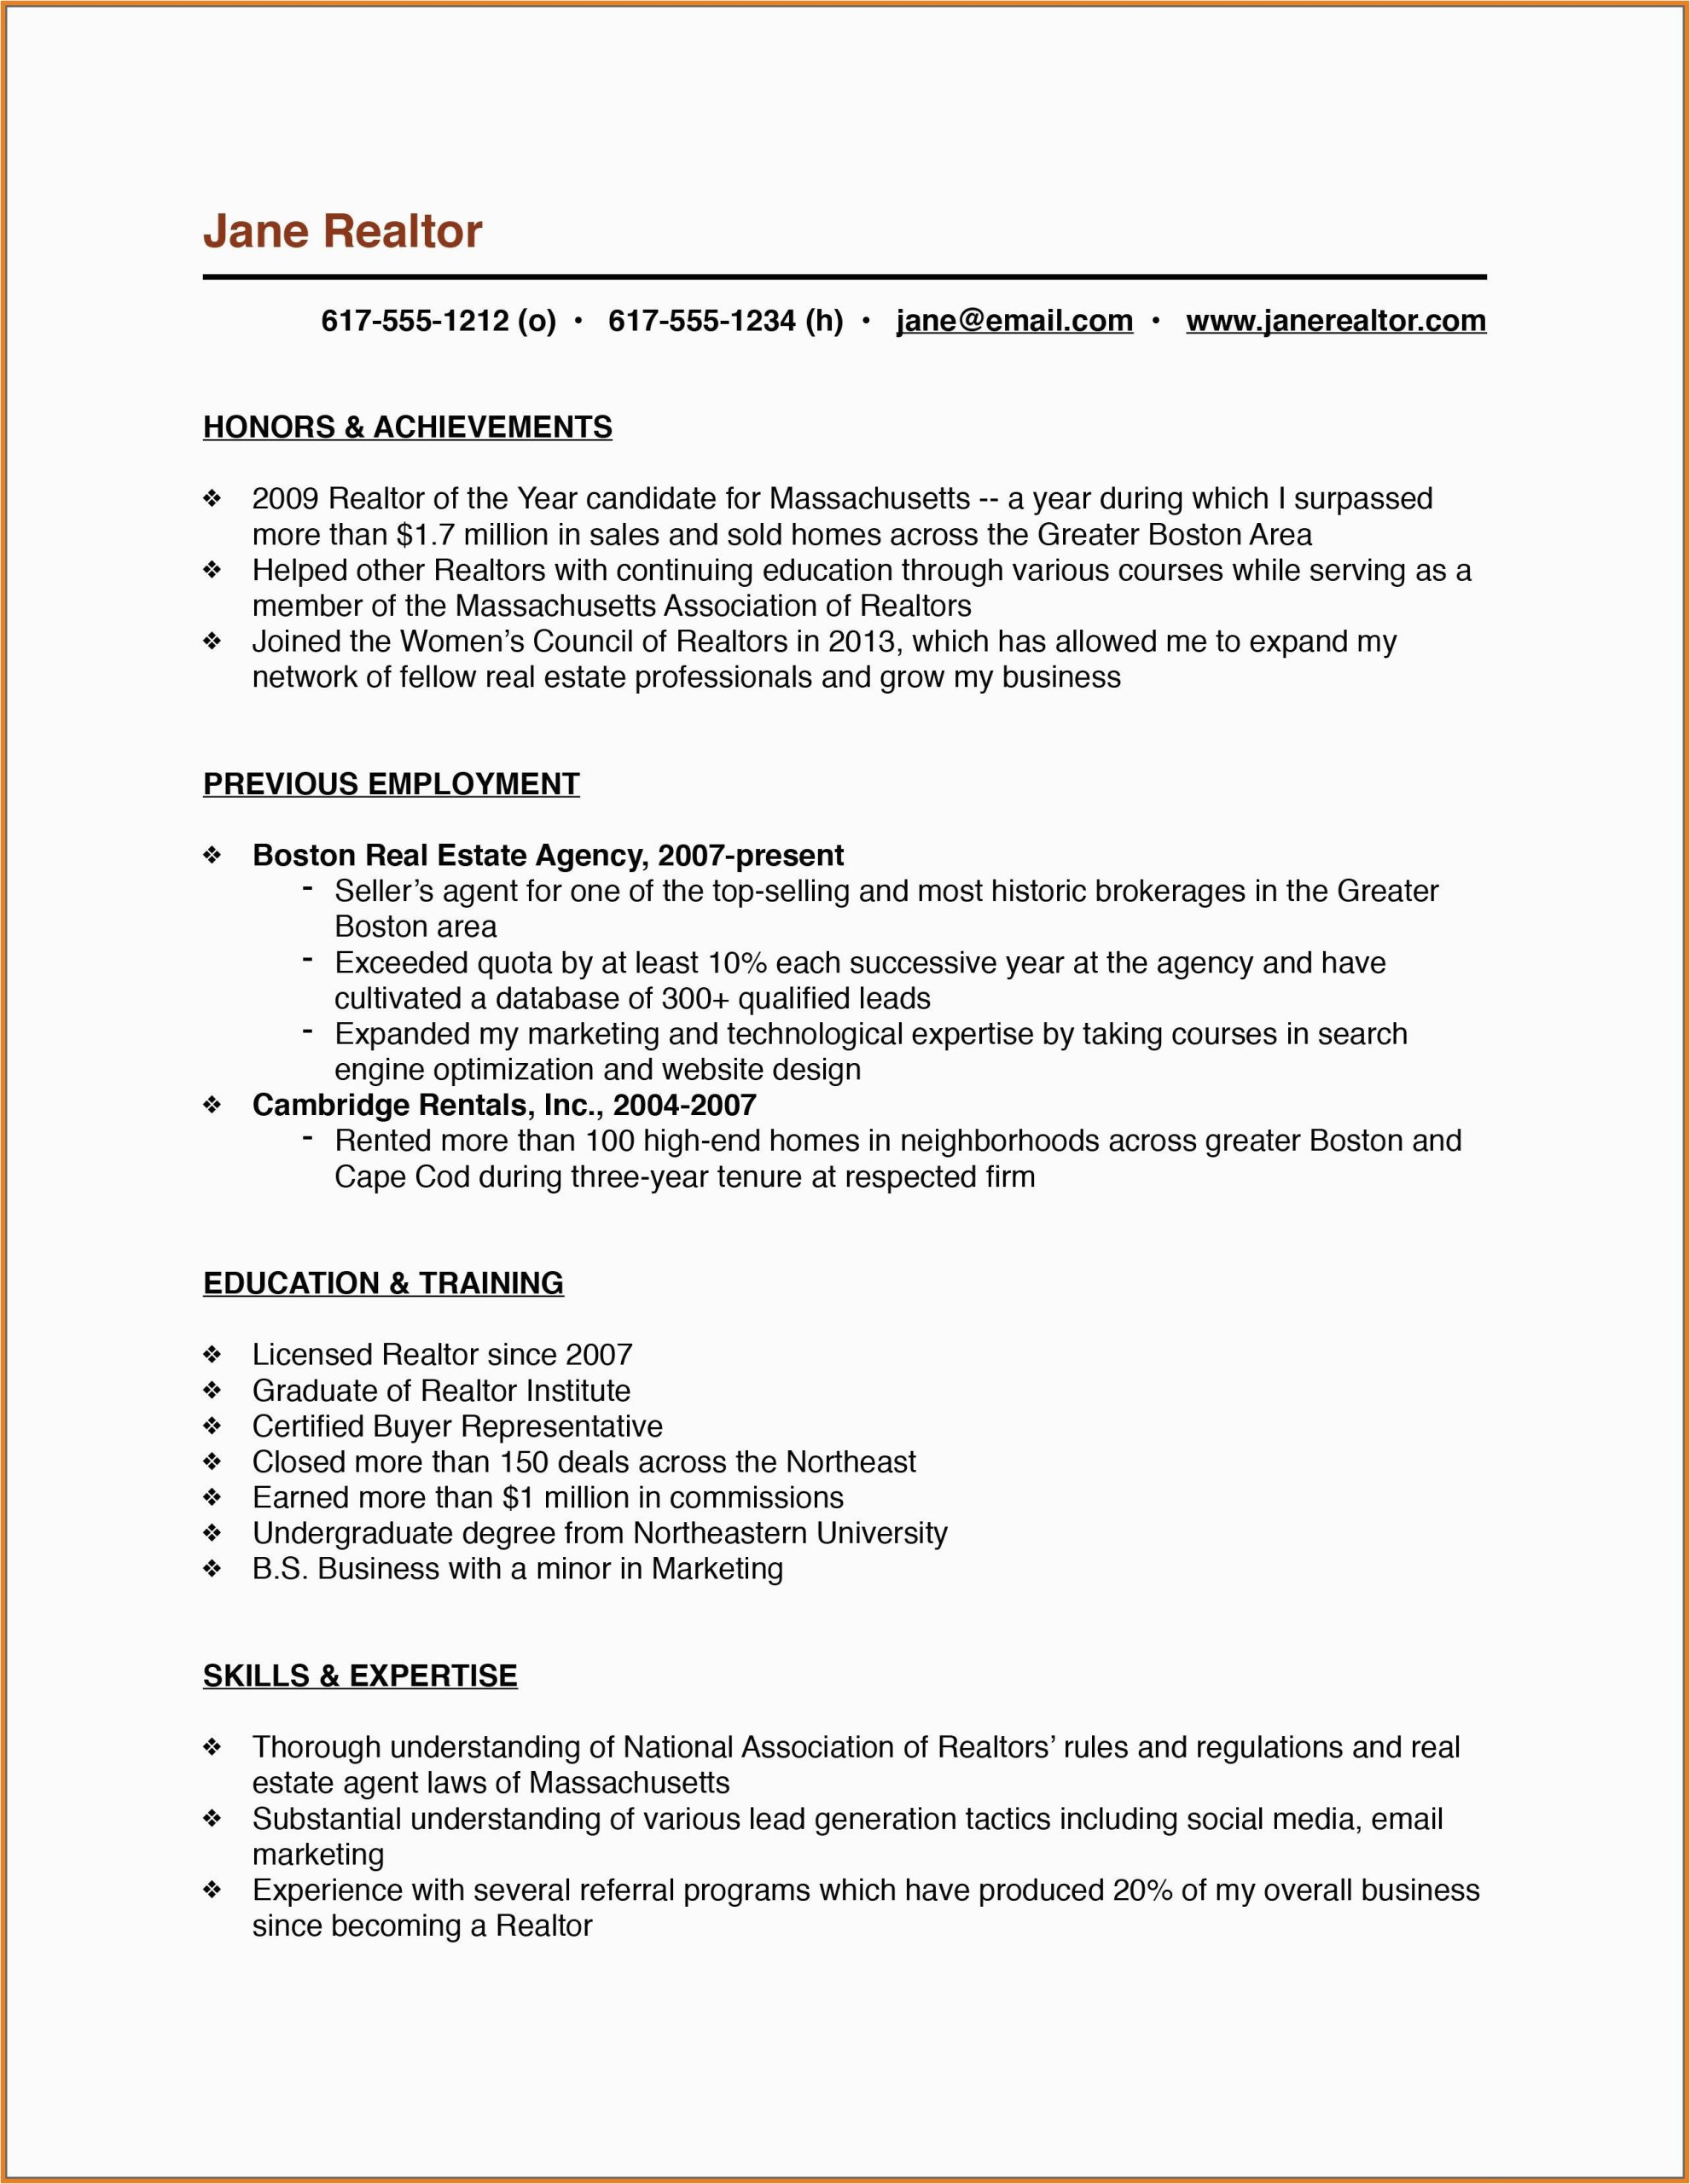 Sample Resume with A Personal Statement Resume Personal Statements Examples Up to Date Personal Summary for